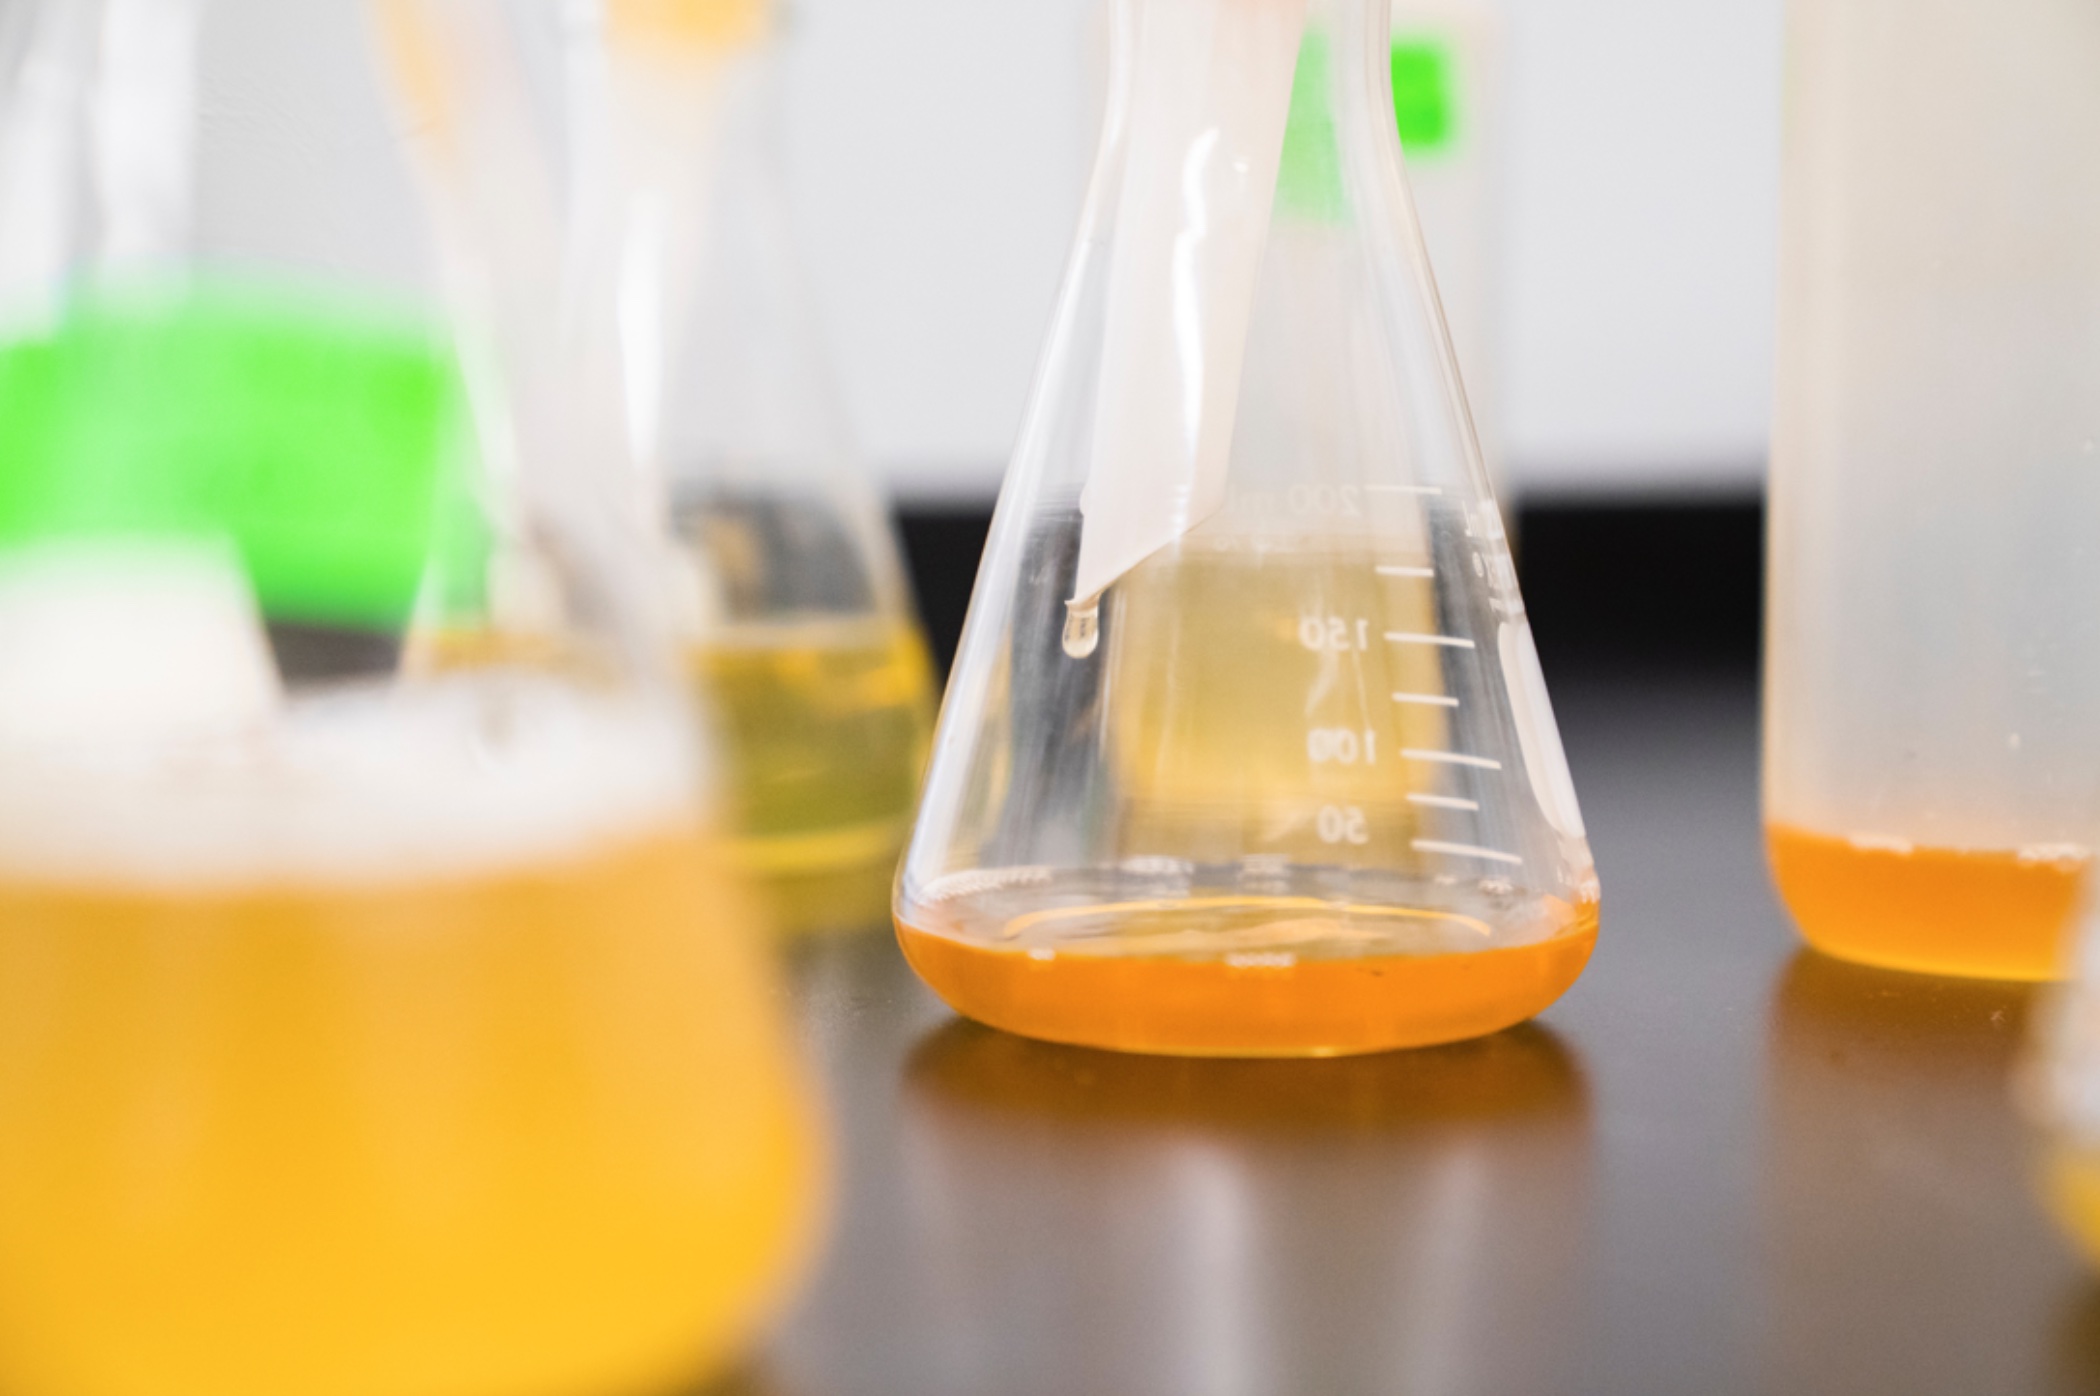 Erlenmeyer flasks containing yellow liquid; image by Elevate, via Unsplash.com.